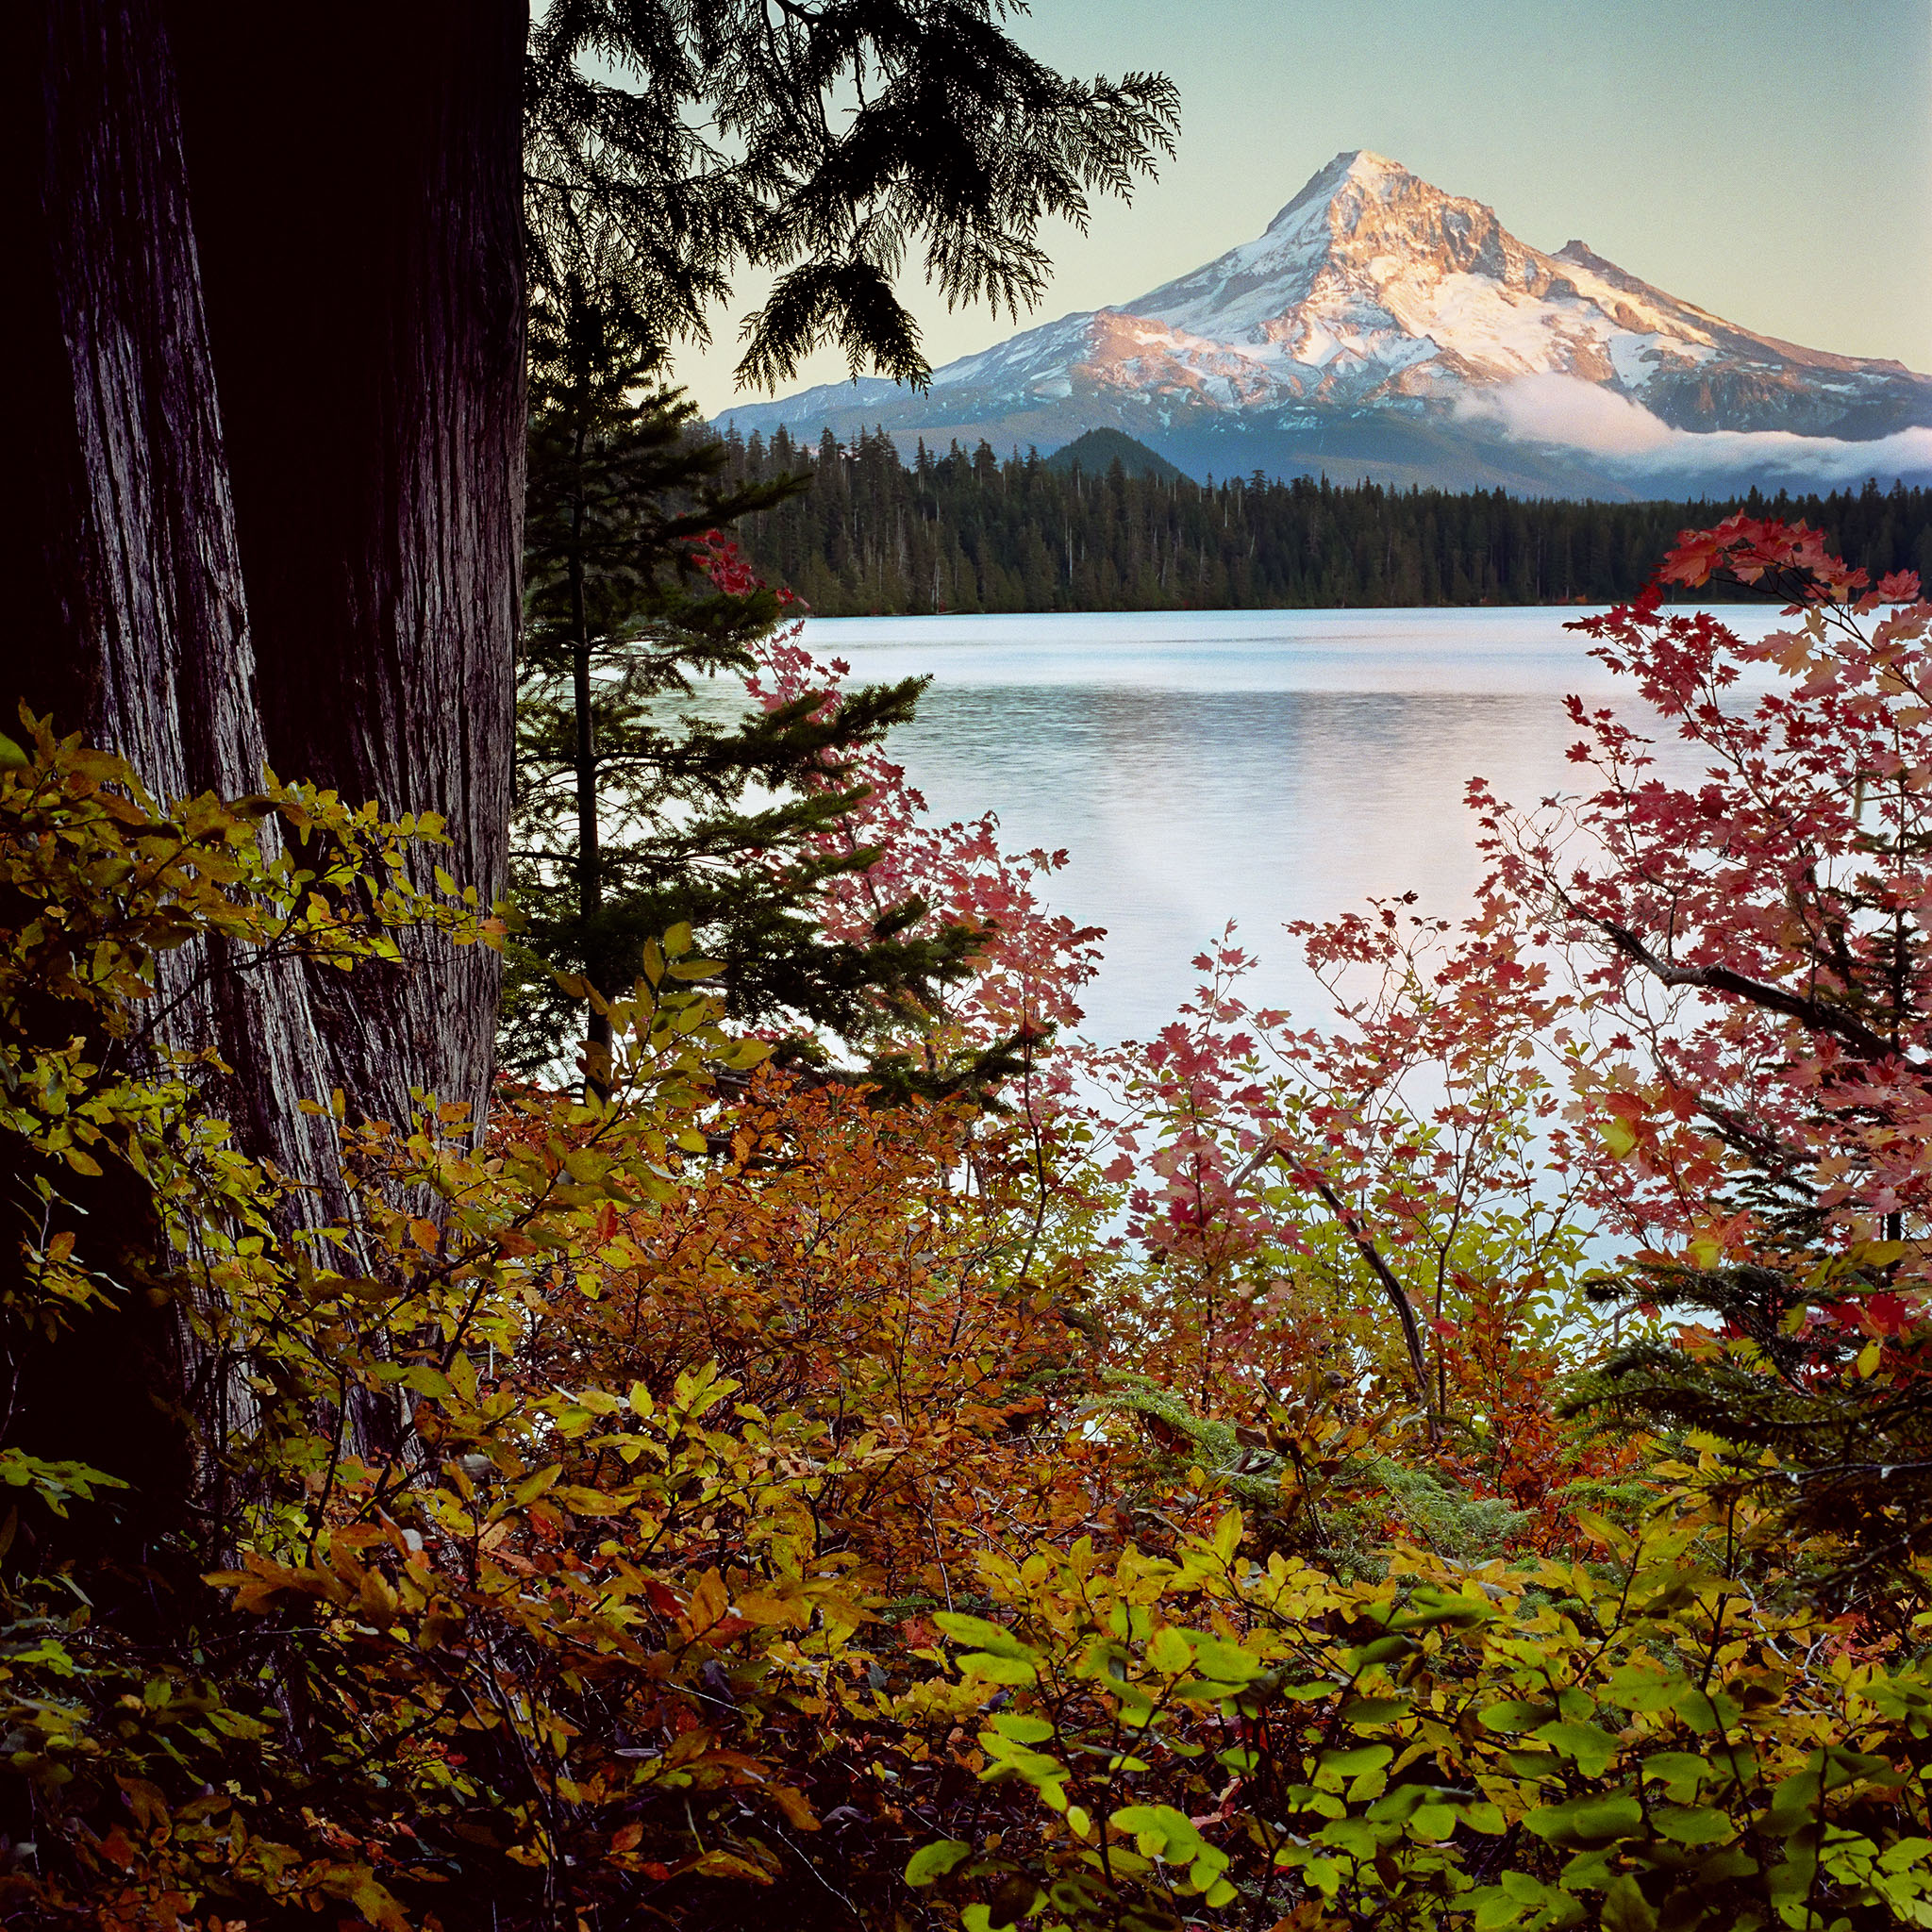 Lost-Lake-mt-hood-national-forest-or-8x8.jpg